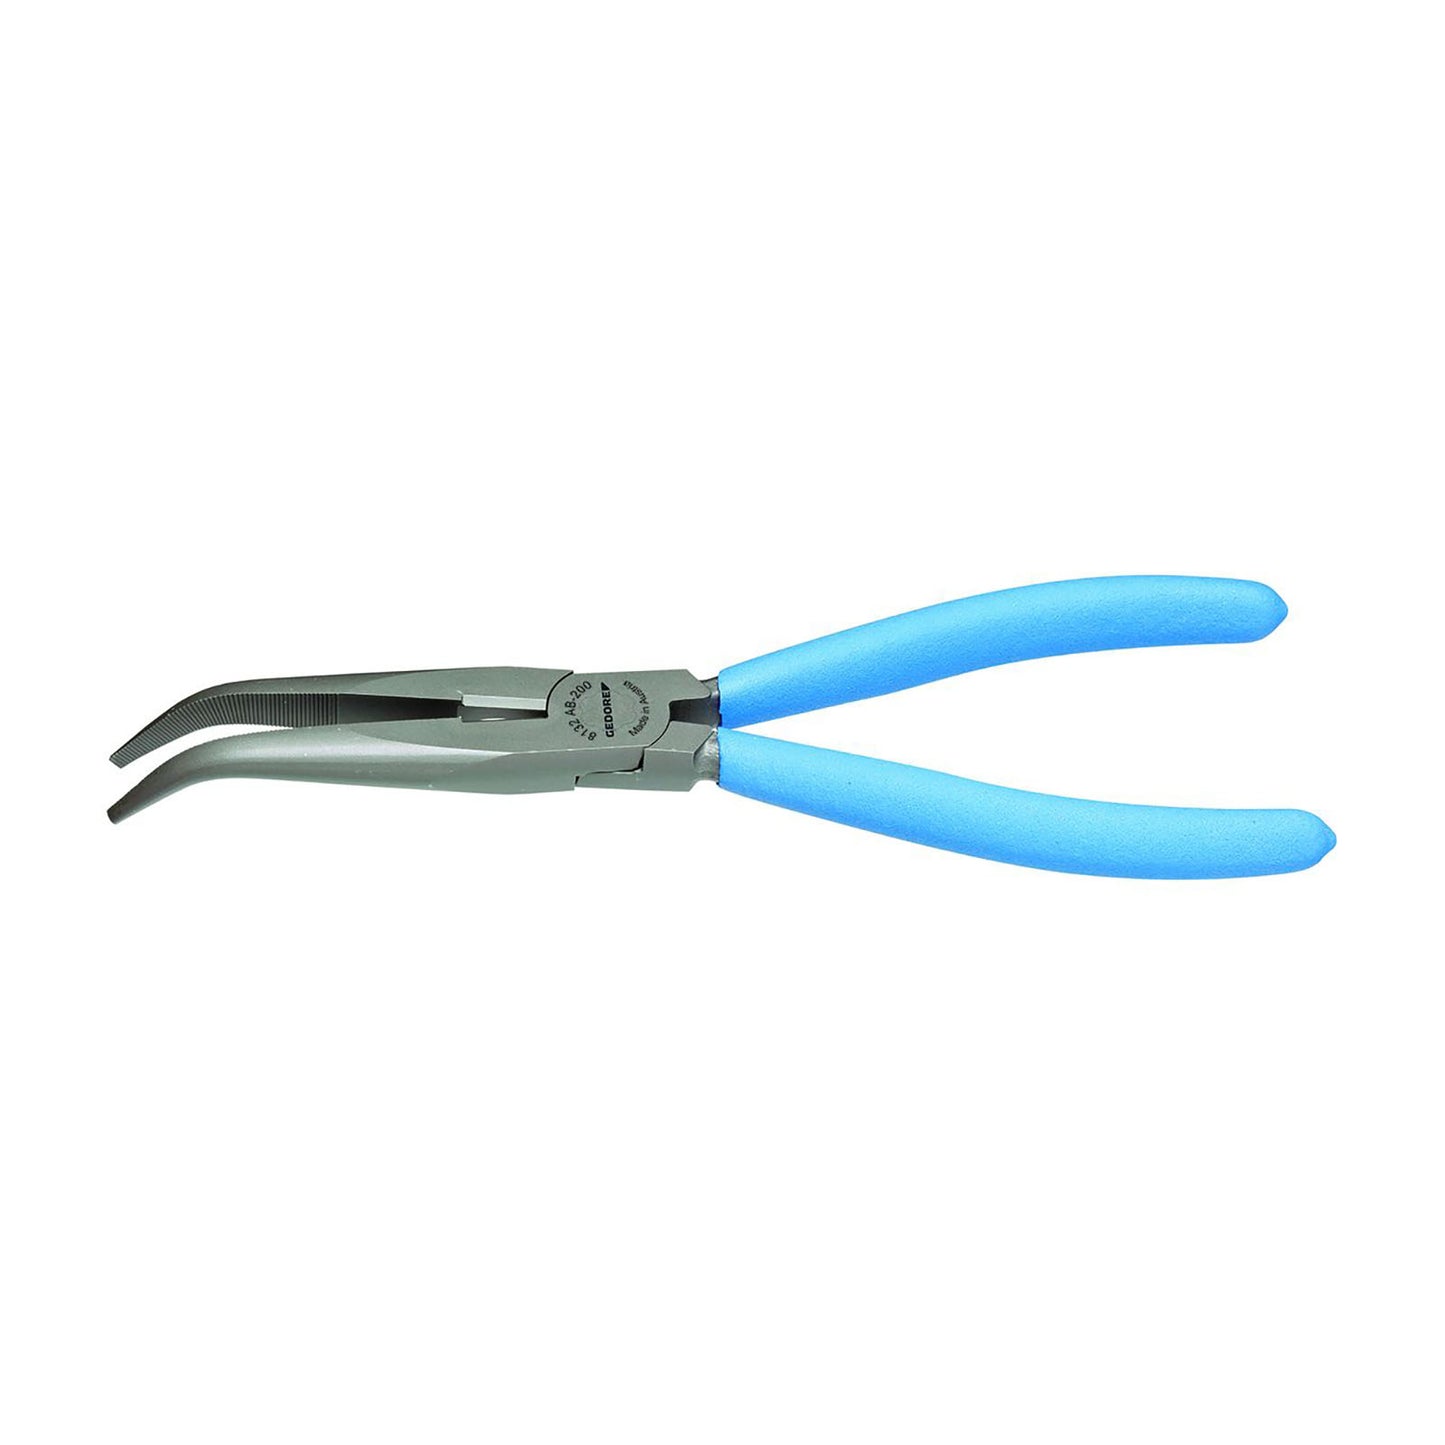 GEDORE 8132 AB-200 TL - Semi-round nose pliers 200mm (6711260)